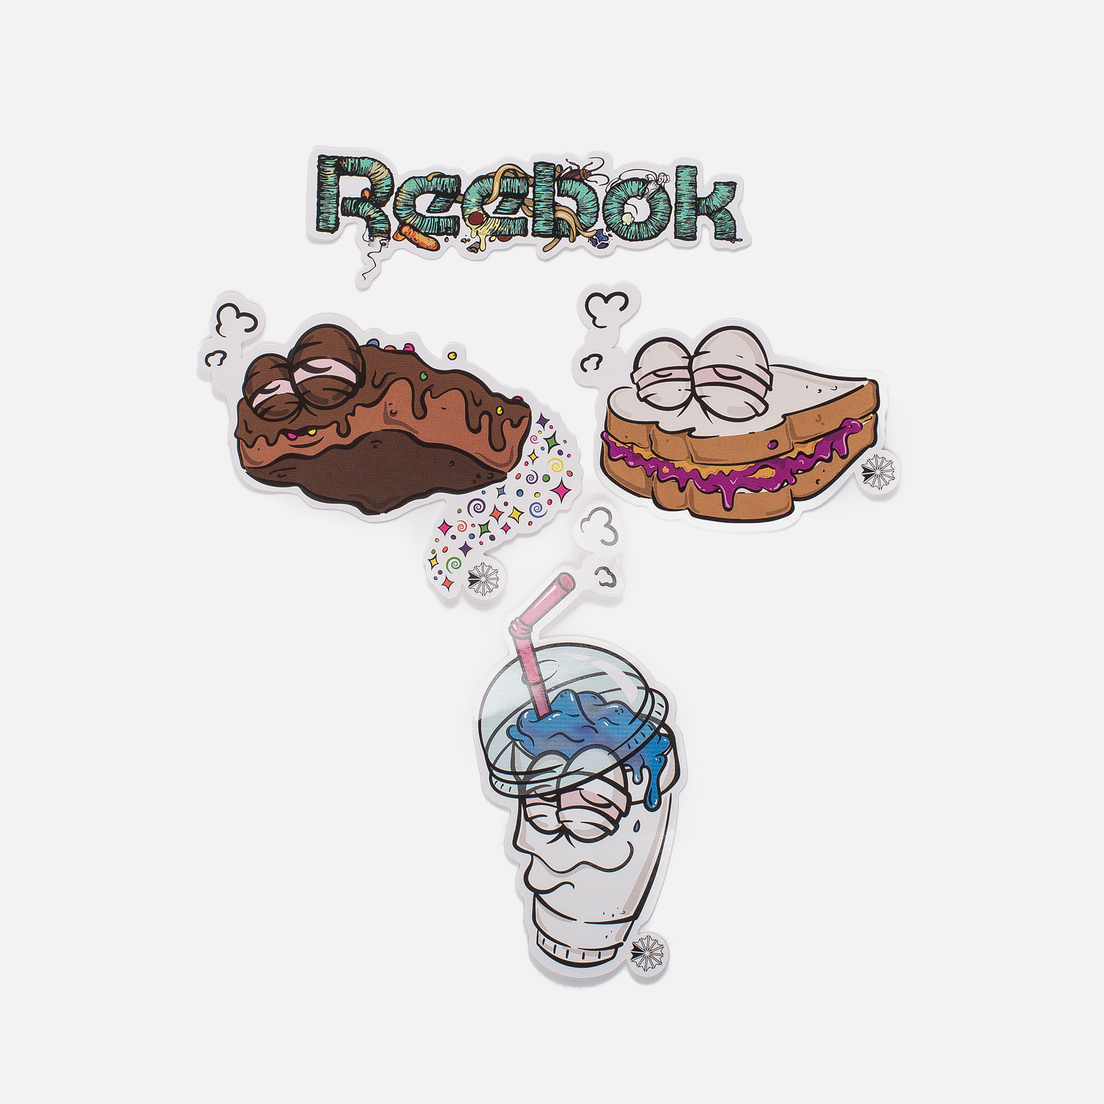 Reebok Кроссовки Classic Leather Munchies Pack